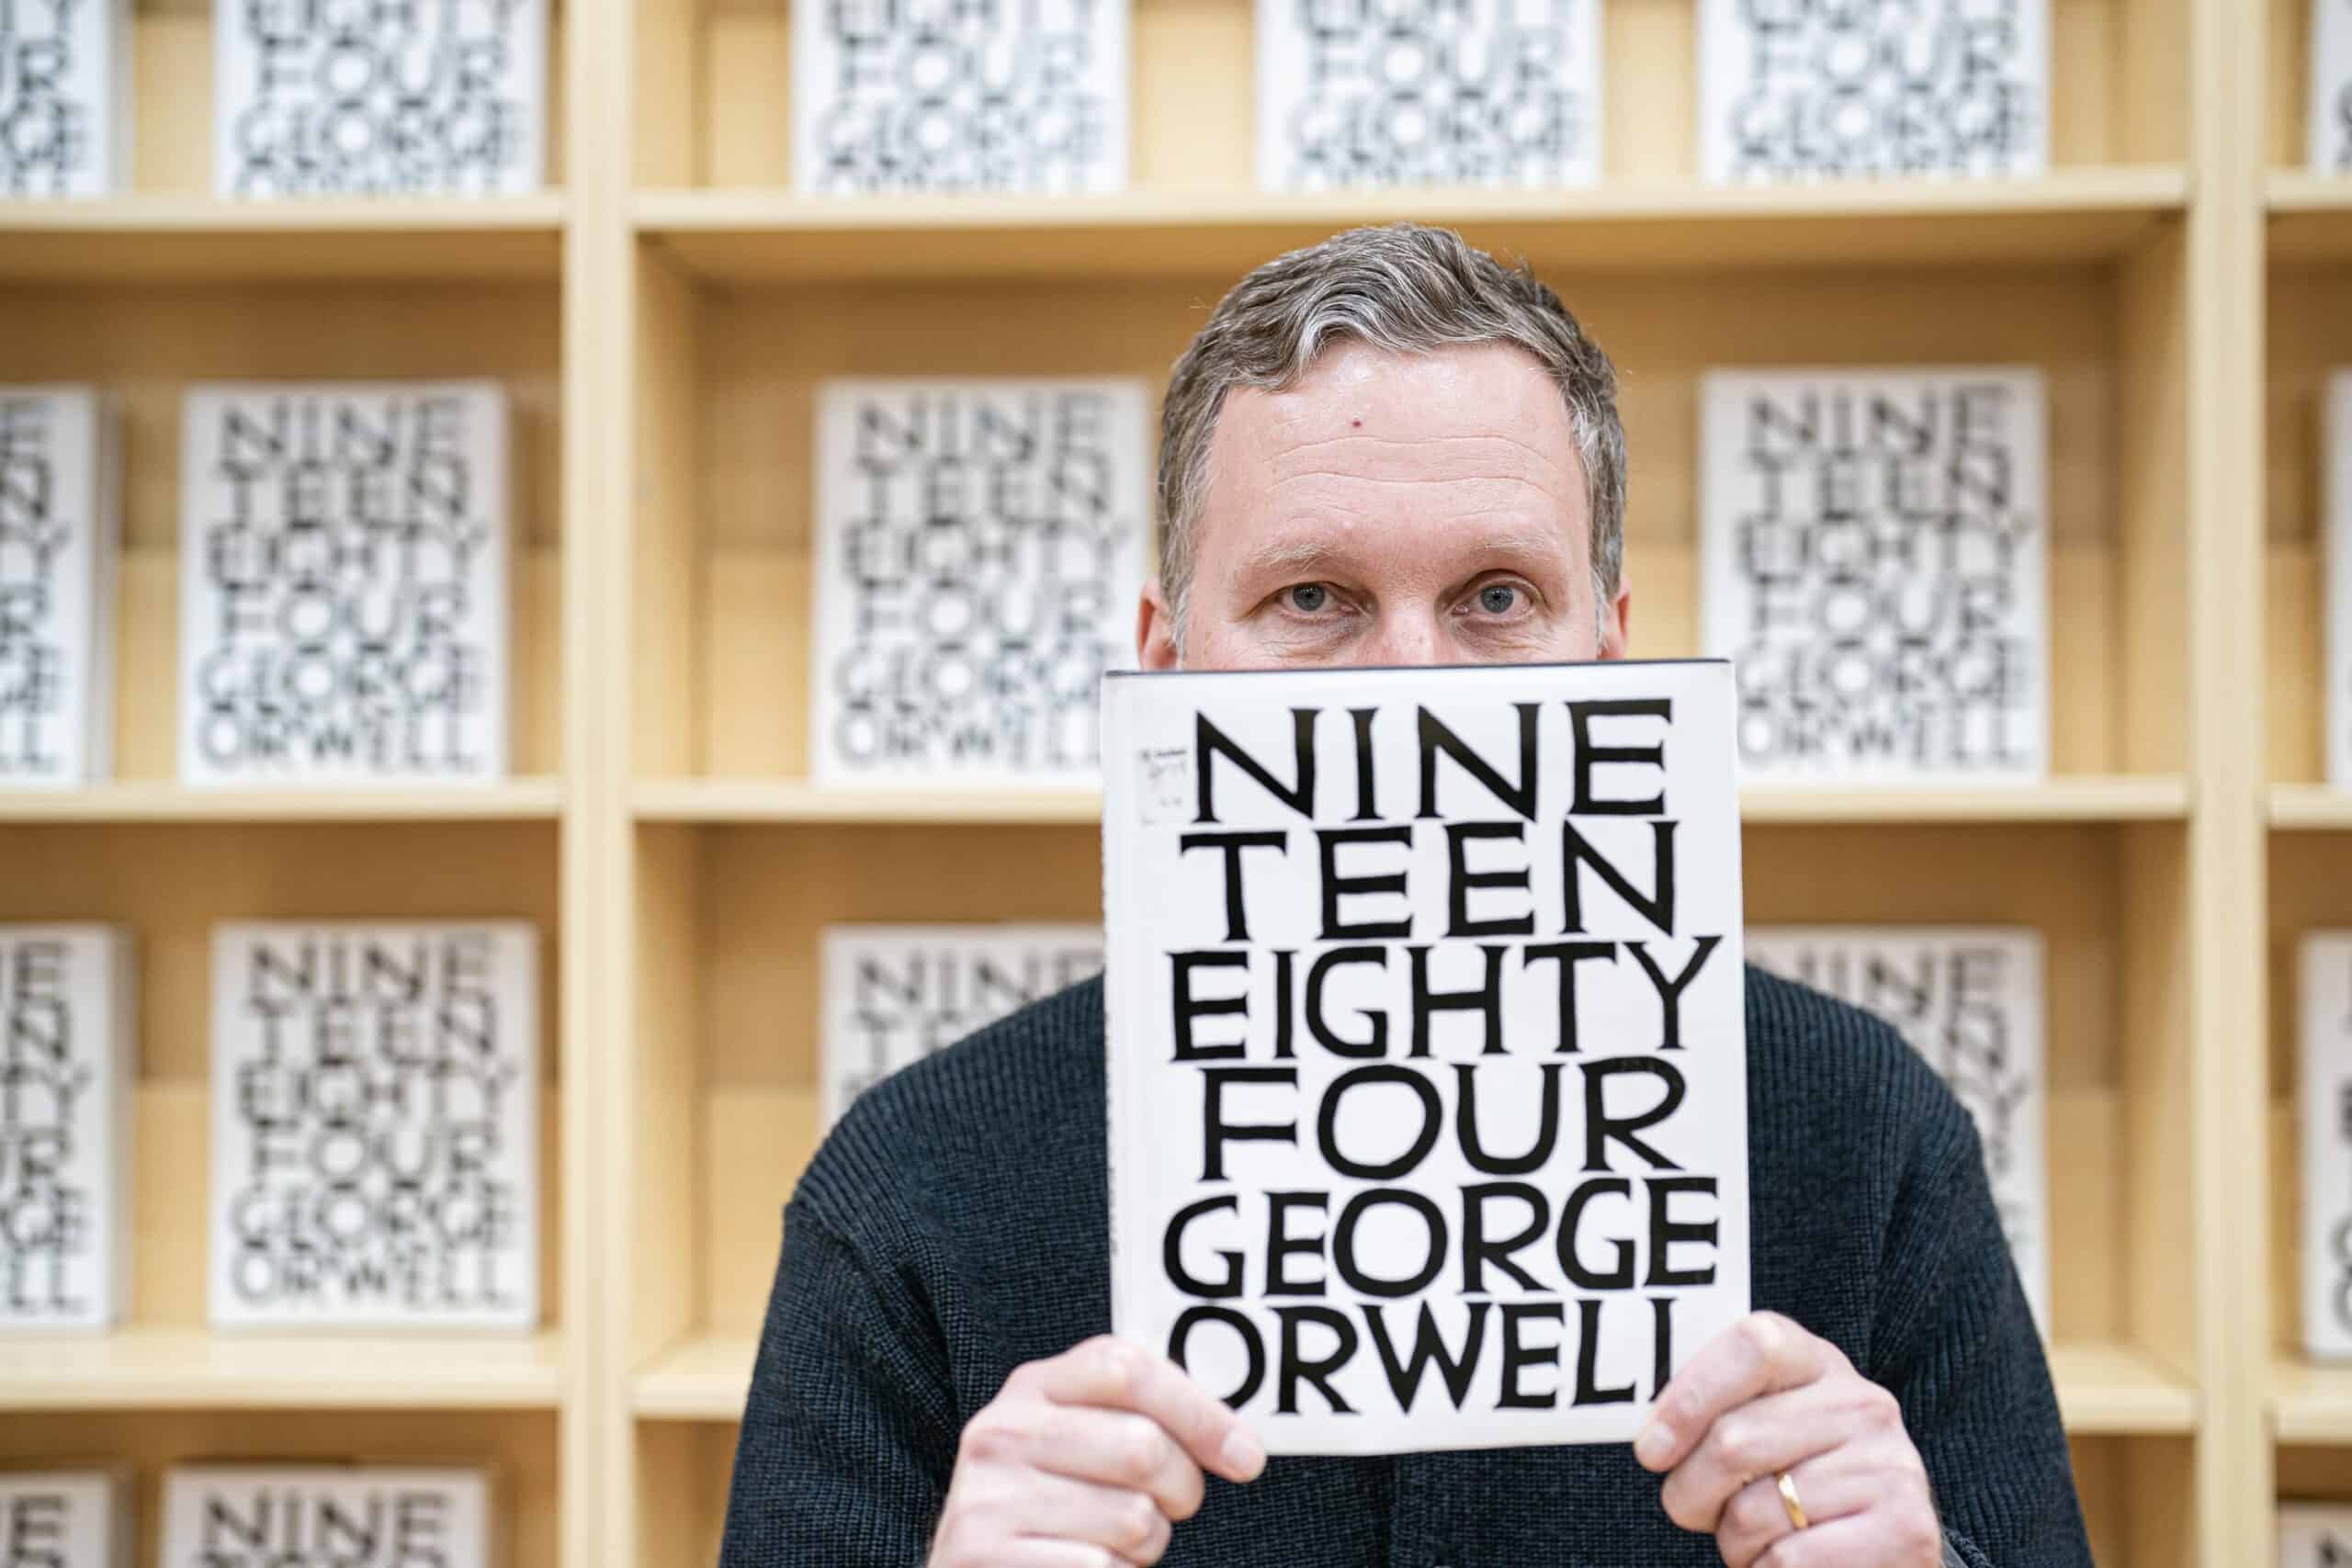 Limited edition of Orwell's Nineteen Eighty-Four released